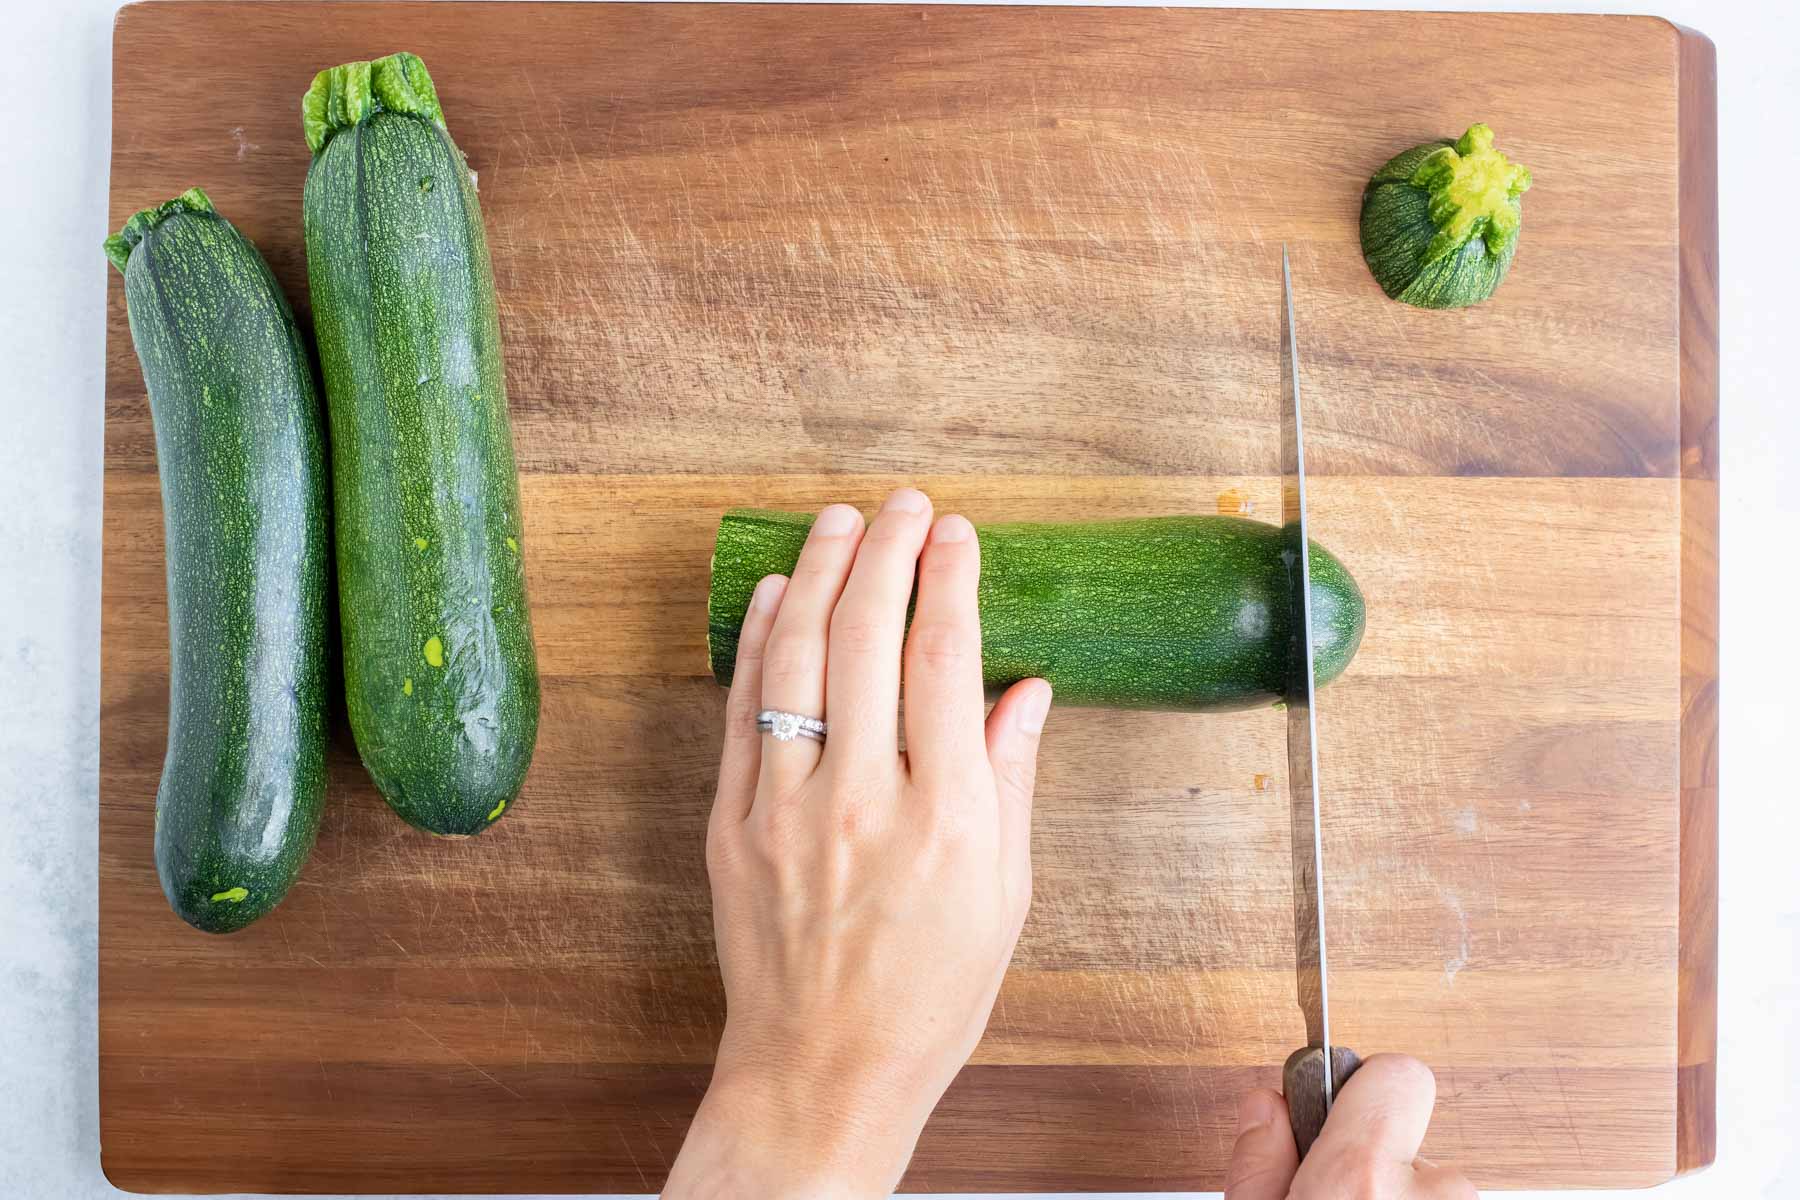 A sharp knife slices off the end of a zucchini on a wooden cutting board.